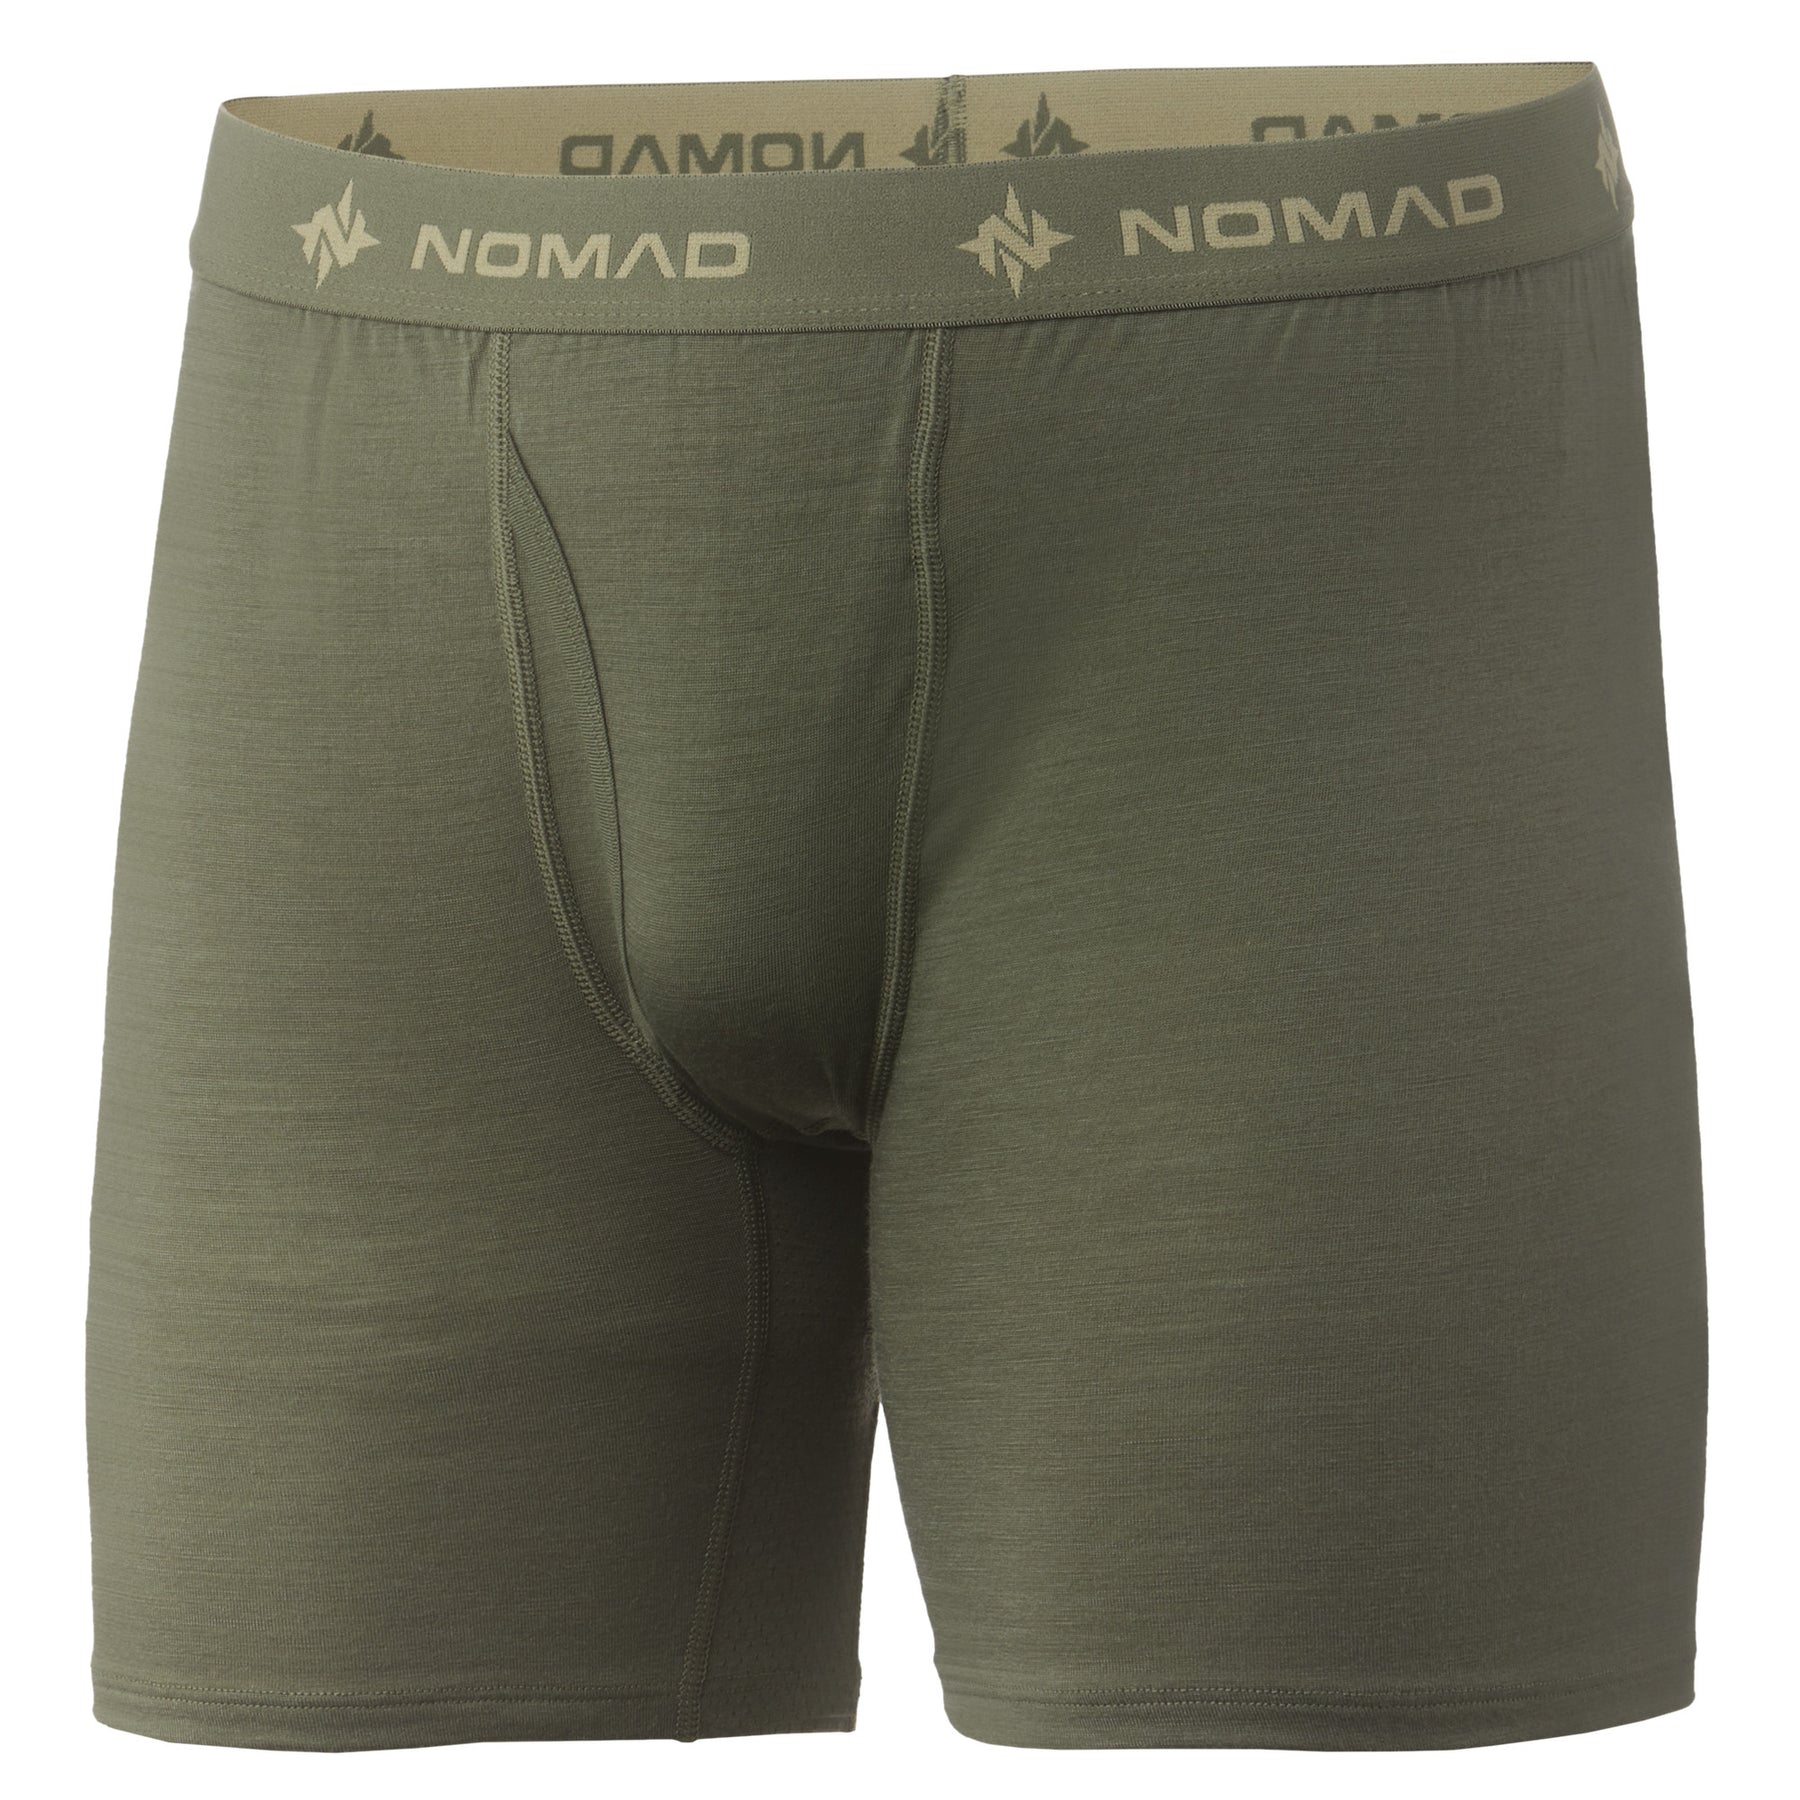 Nomad Durawool Boxer Jock – NOMAD Outdoor